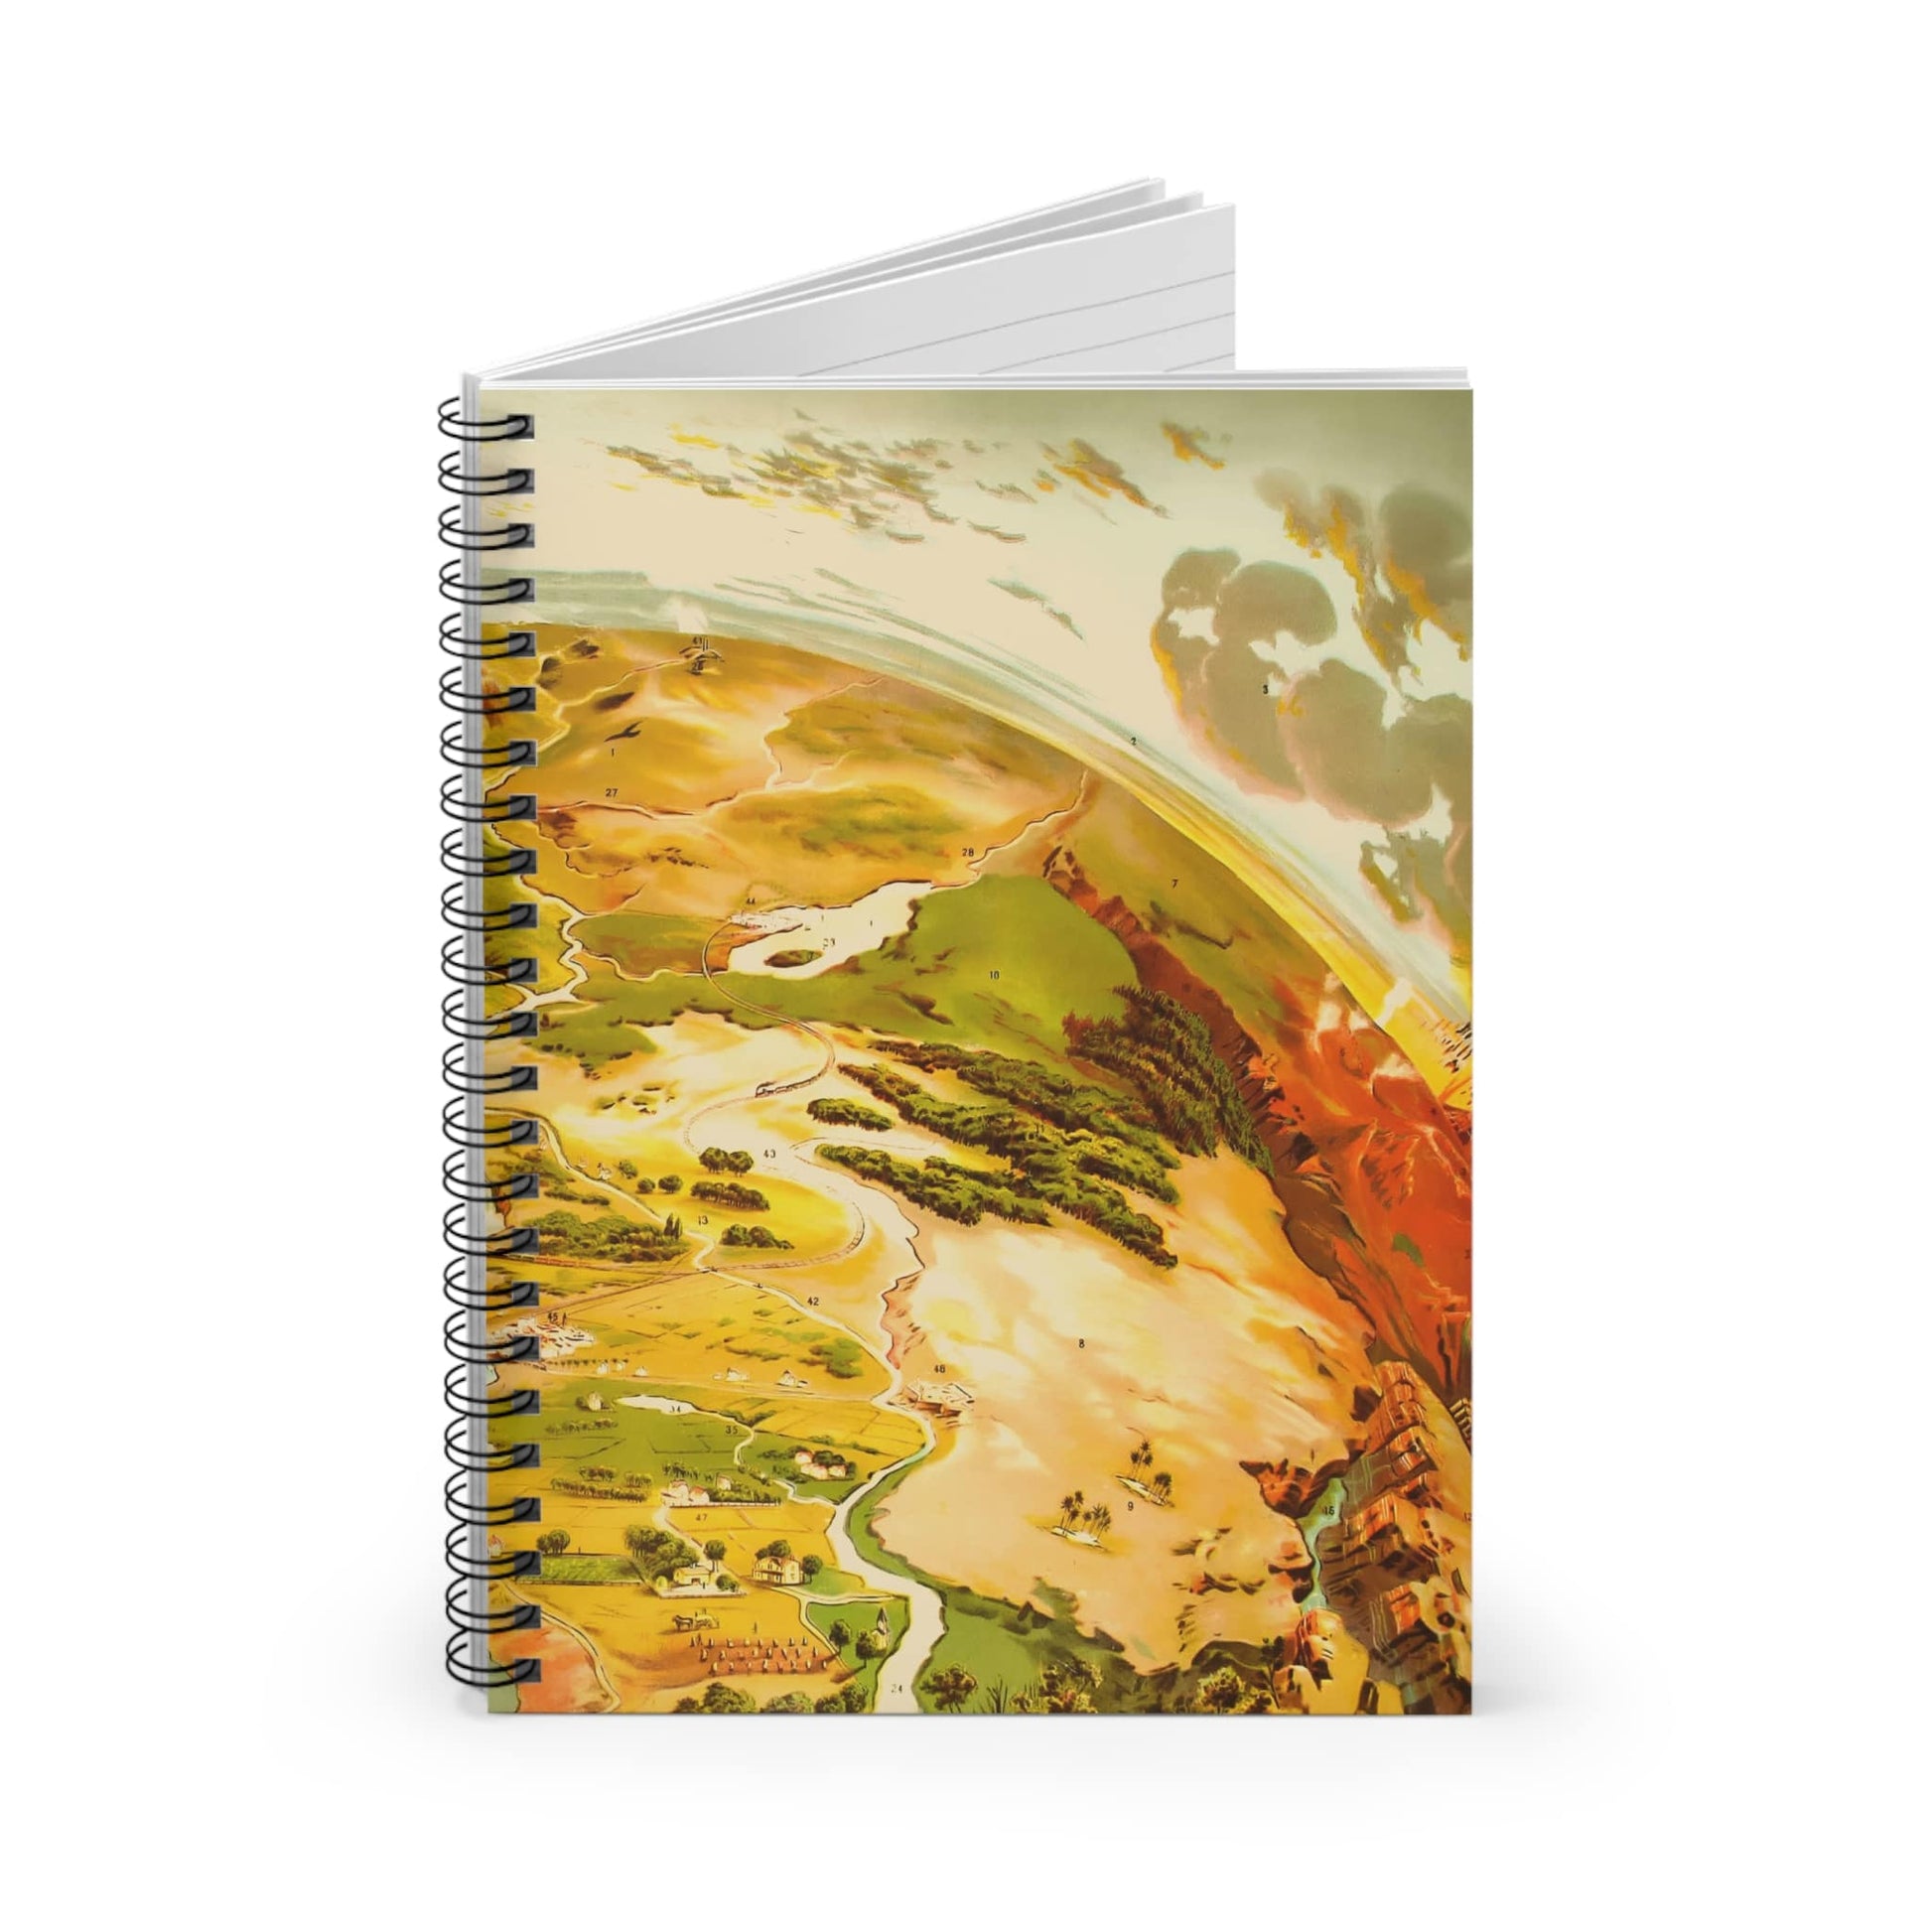 Pictorial of Earth Spiral Notebook Standing up on White Desk